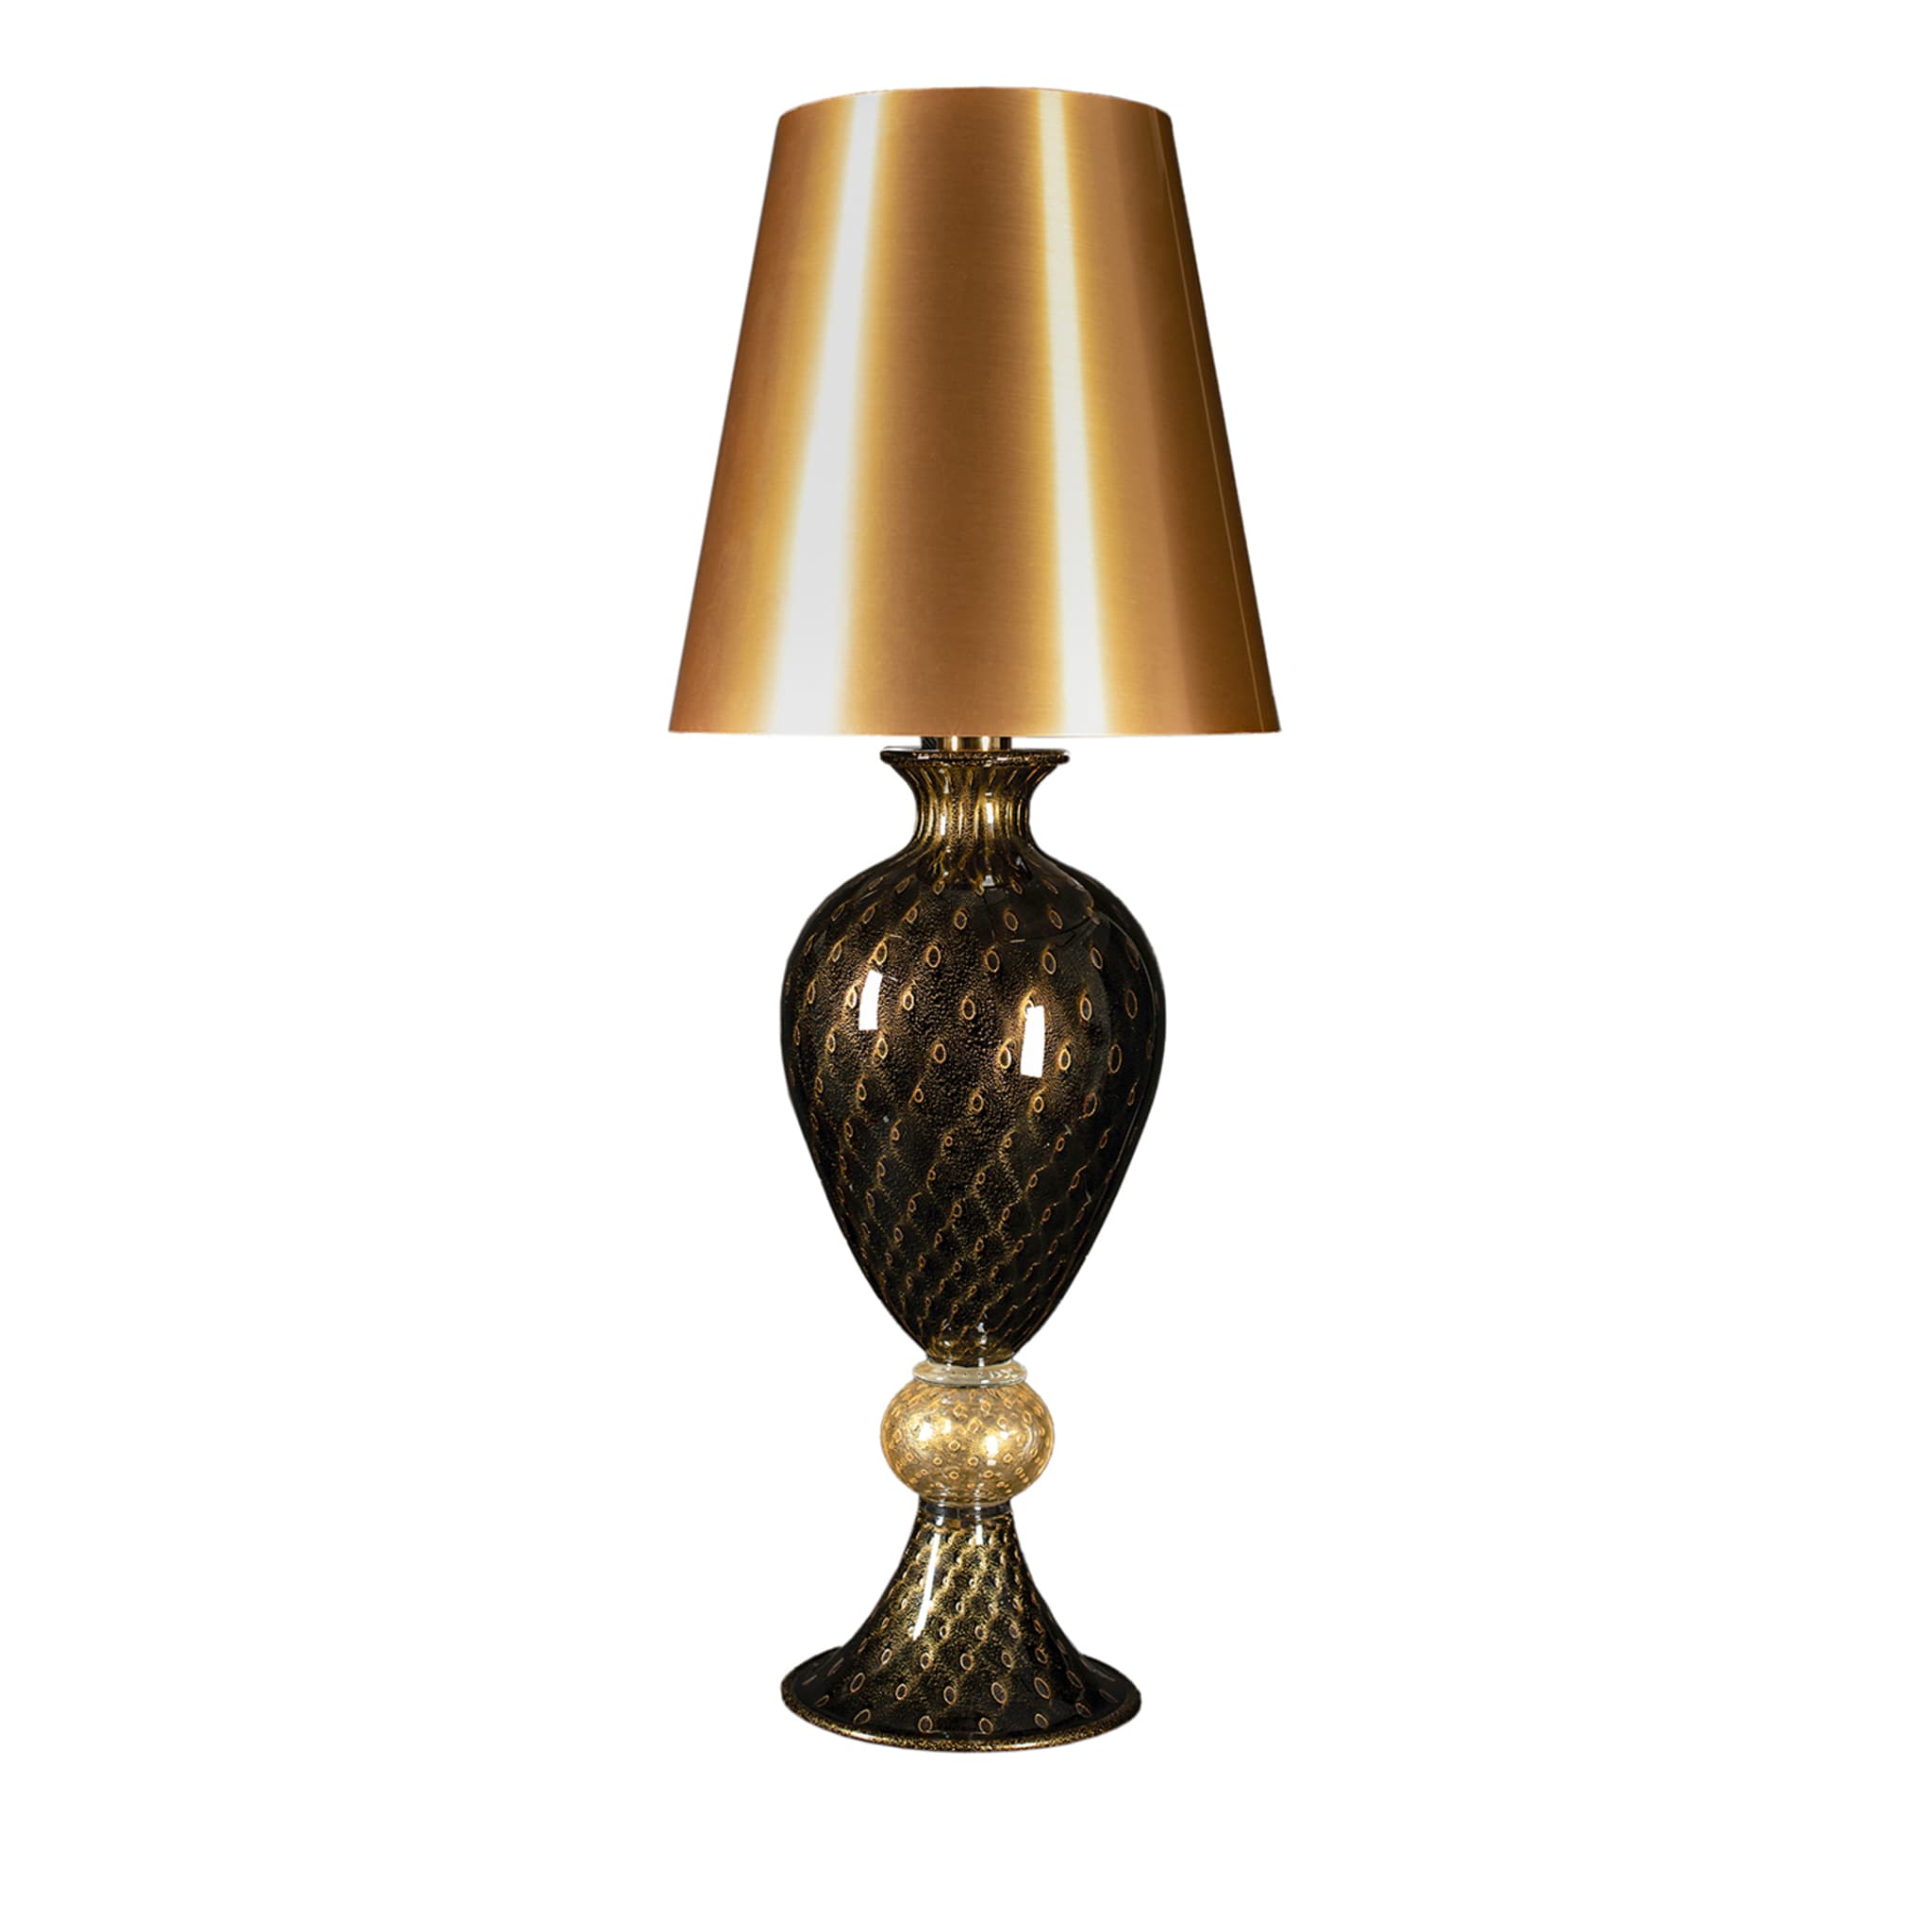 Tall Black and Golden Table Lamp #2 - Main view